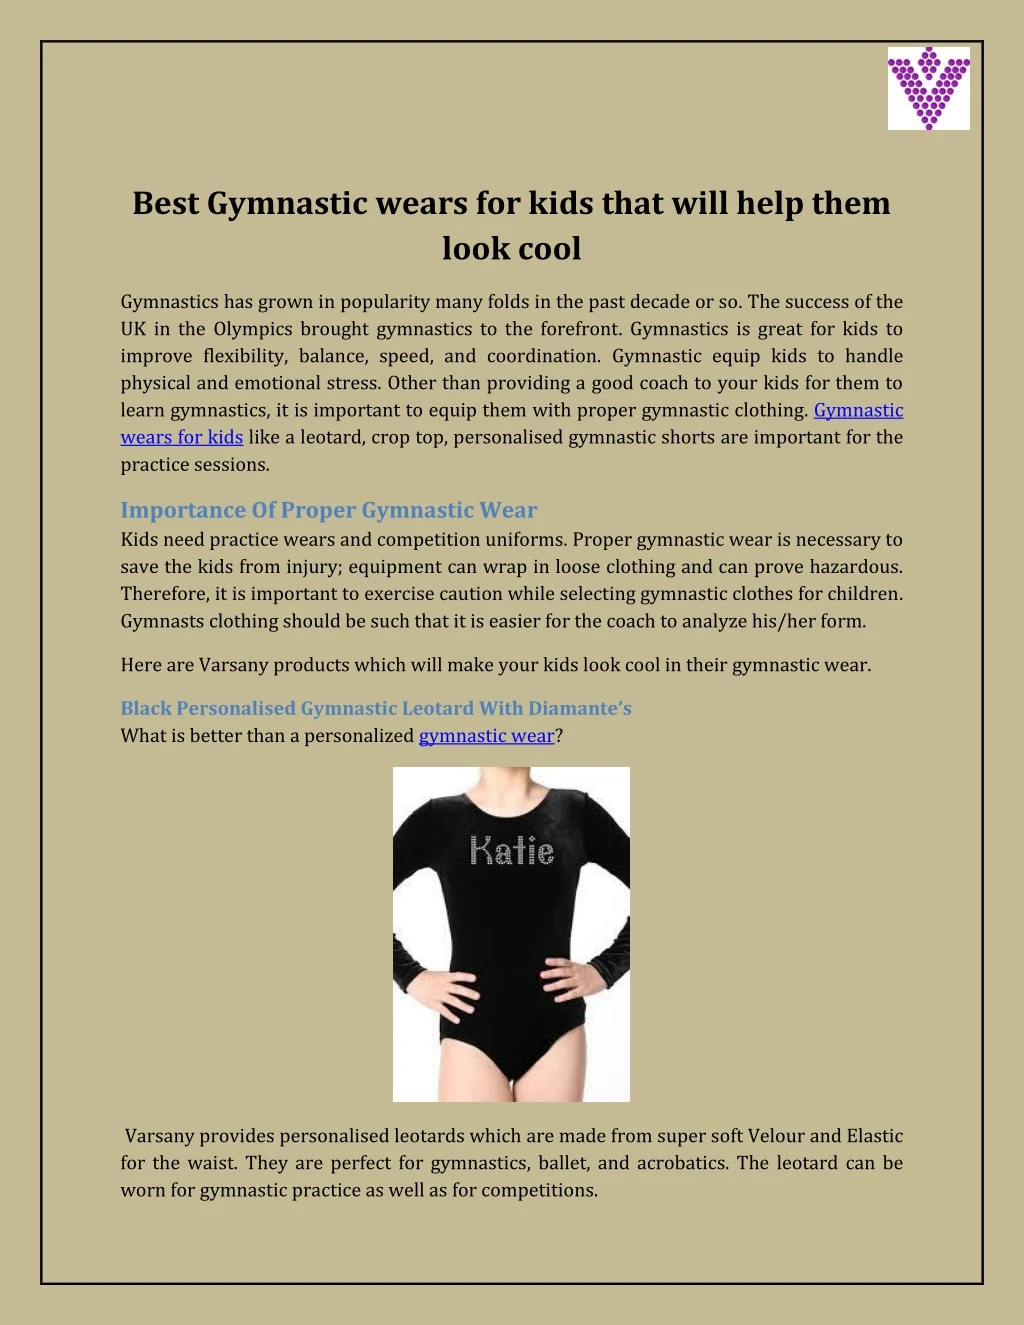 best gymnastic wears for kids that will help them